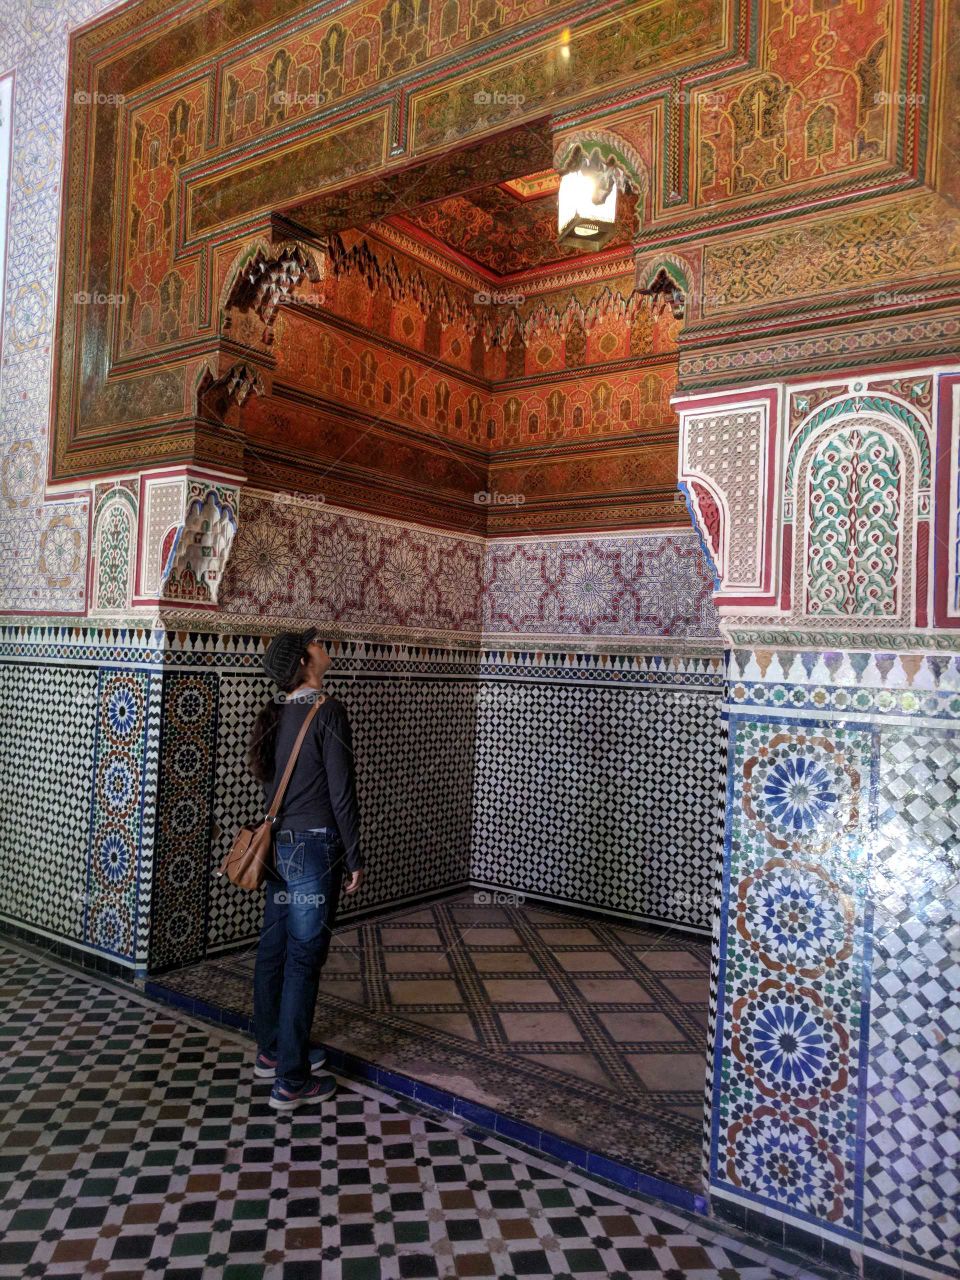 Single Female (Adult Woman) Gazing At and Inspecting the Colorful Ceramic Tile Mosaic Walls and Room in the Bahia Palace in Marrakech in Morocco